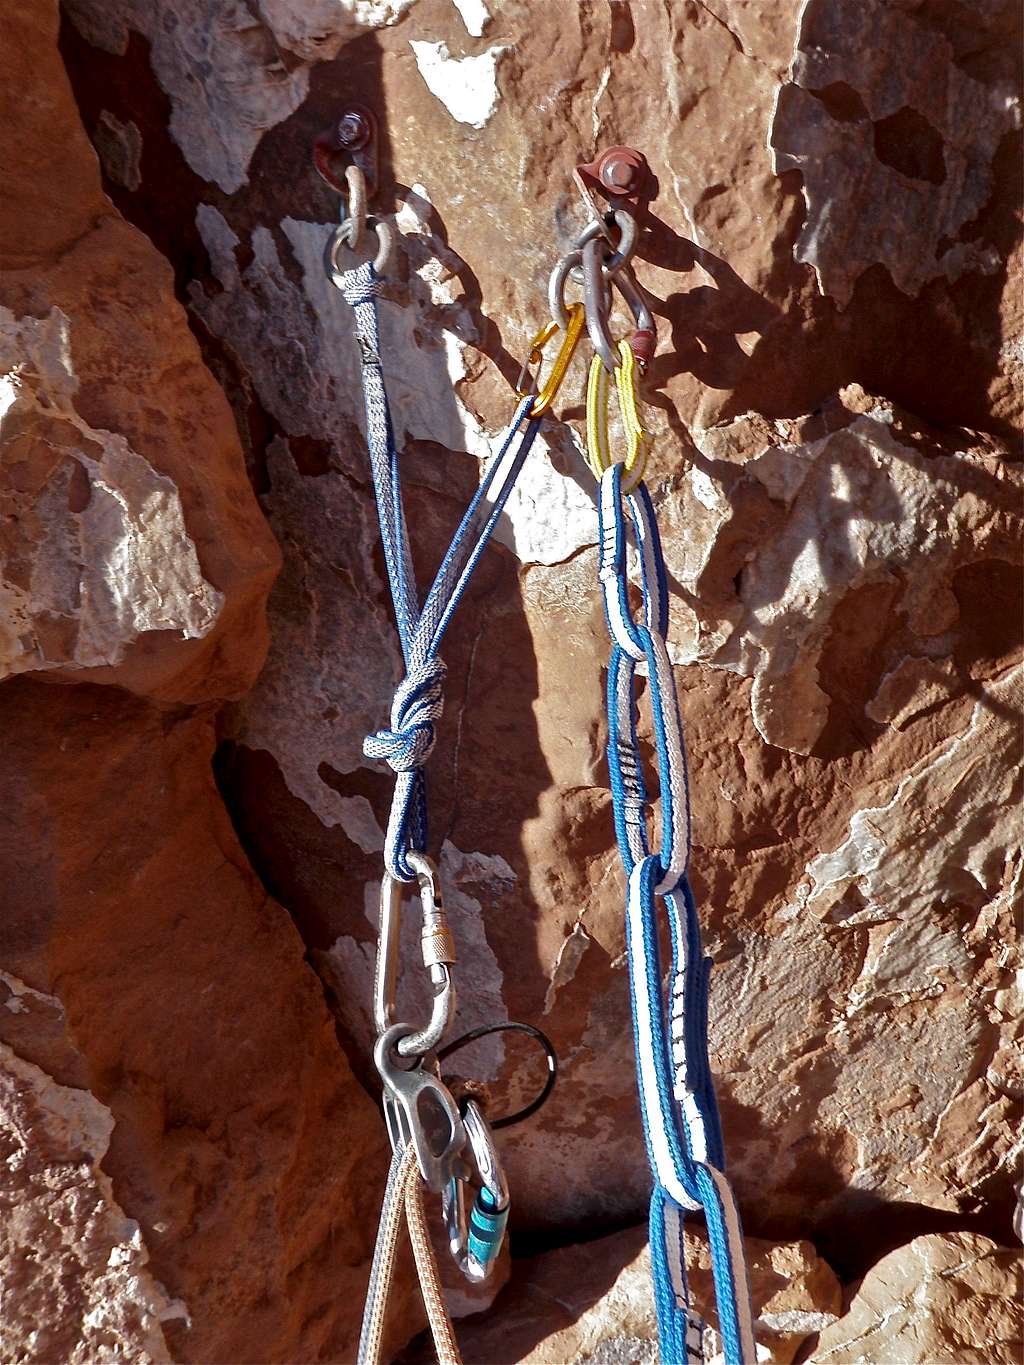 Fixed anchors at the end of 3rd pitch